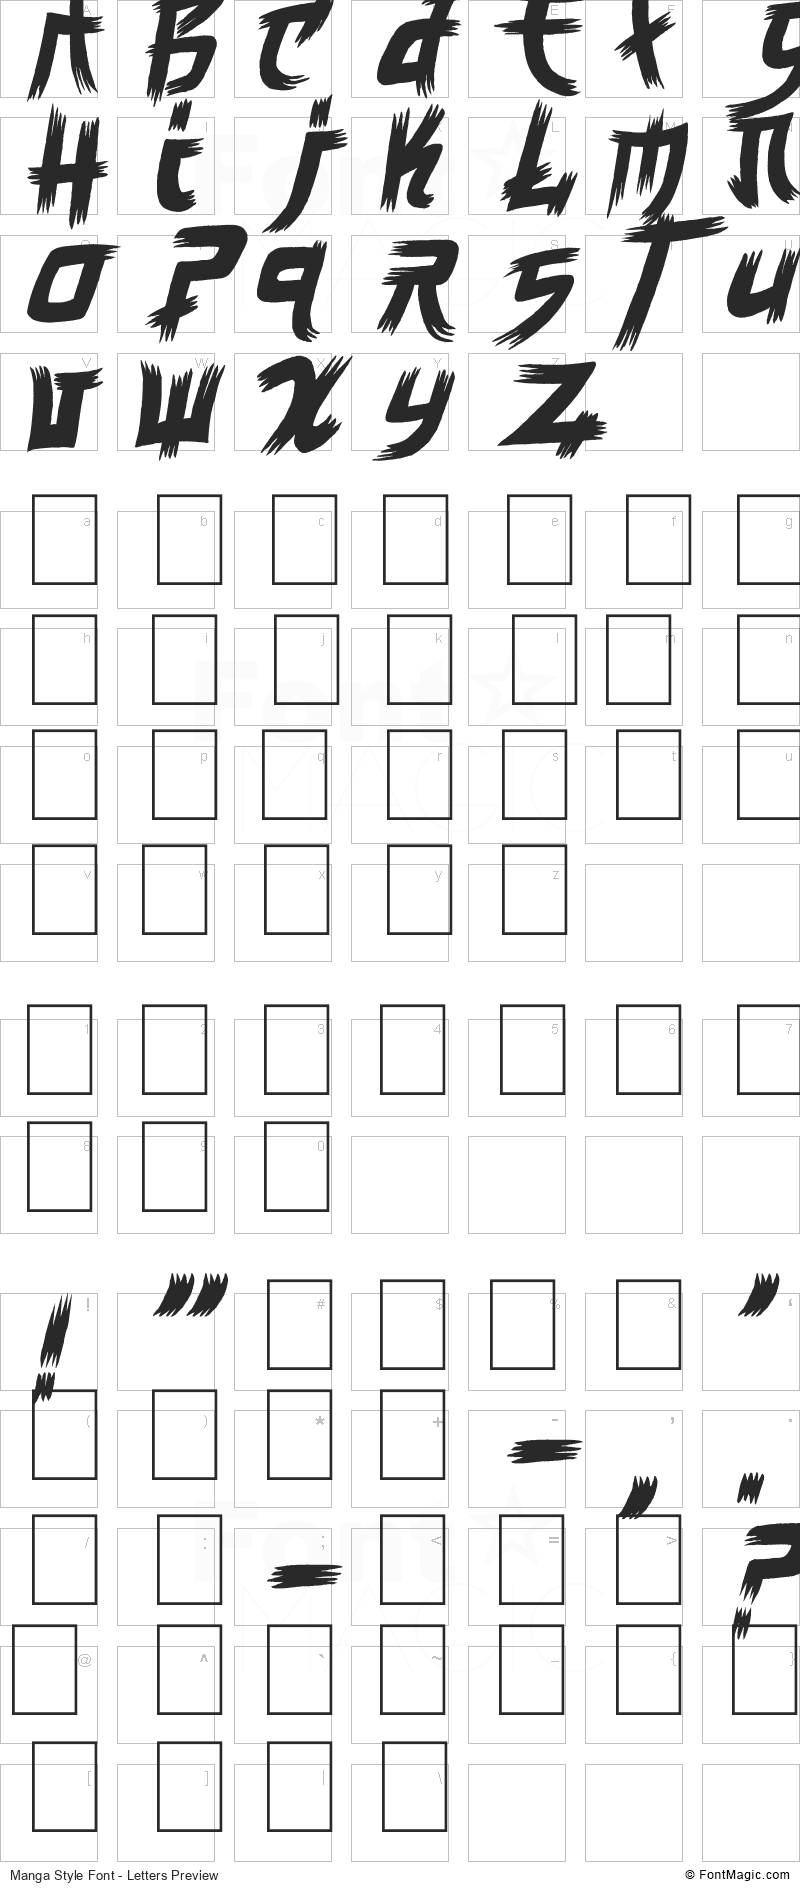 Manga Style Font - All Latters Preview Chart